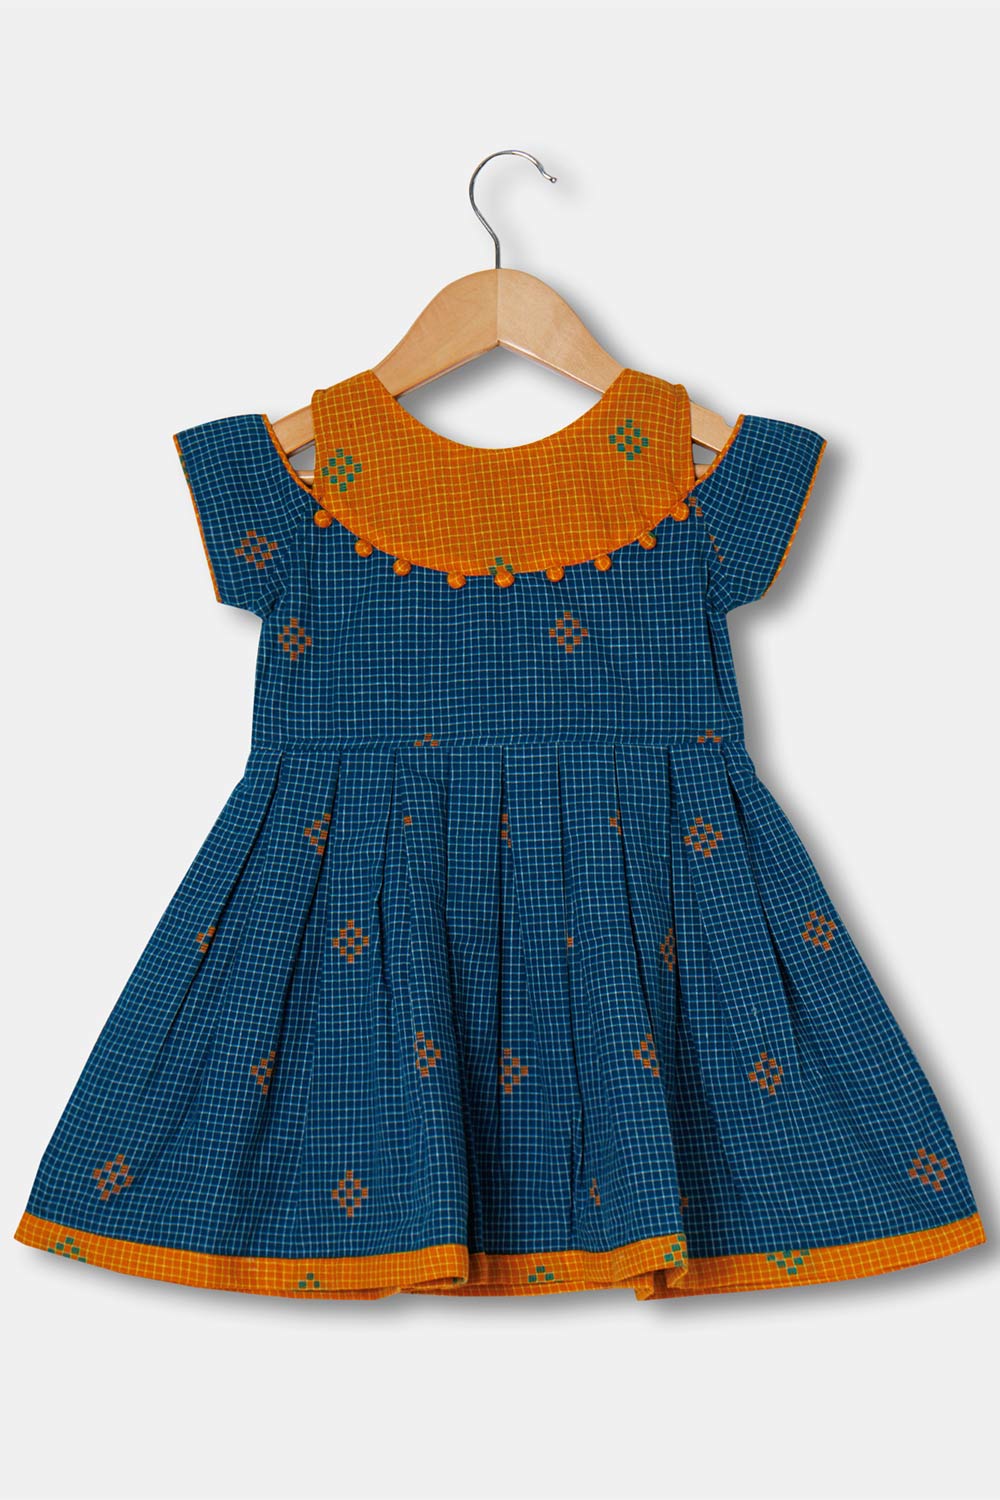 Chittythalli Girls Ethnic Wear Frock Handloom Cotton Relaxed Fit  - Blue - FR23